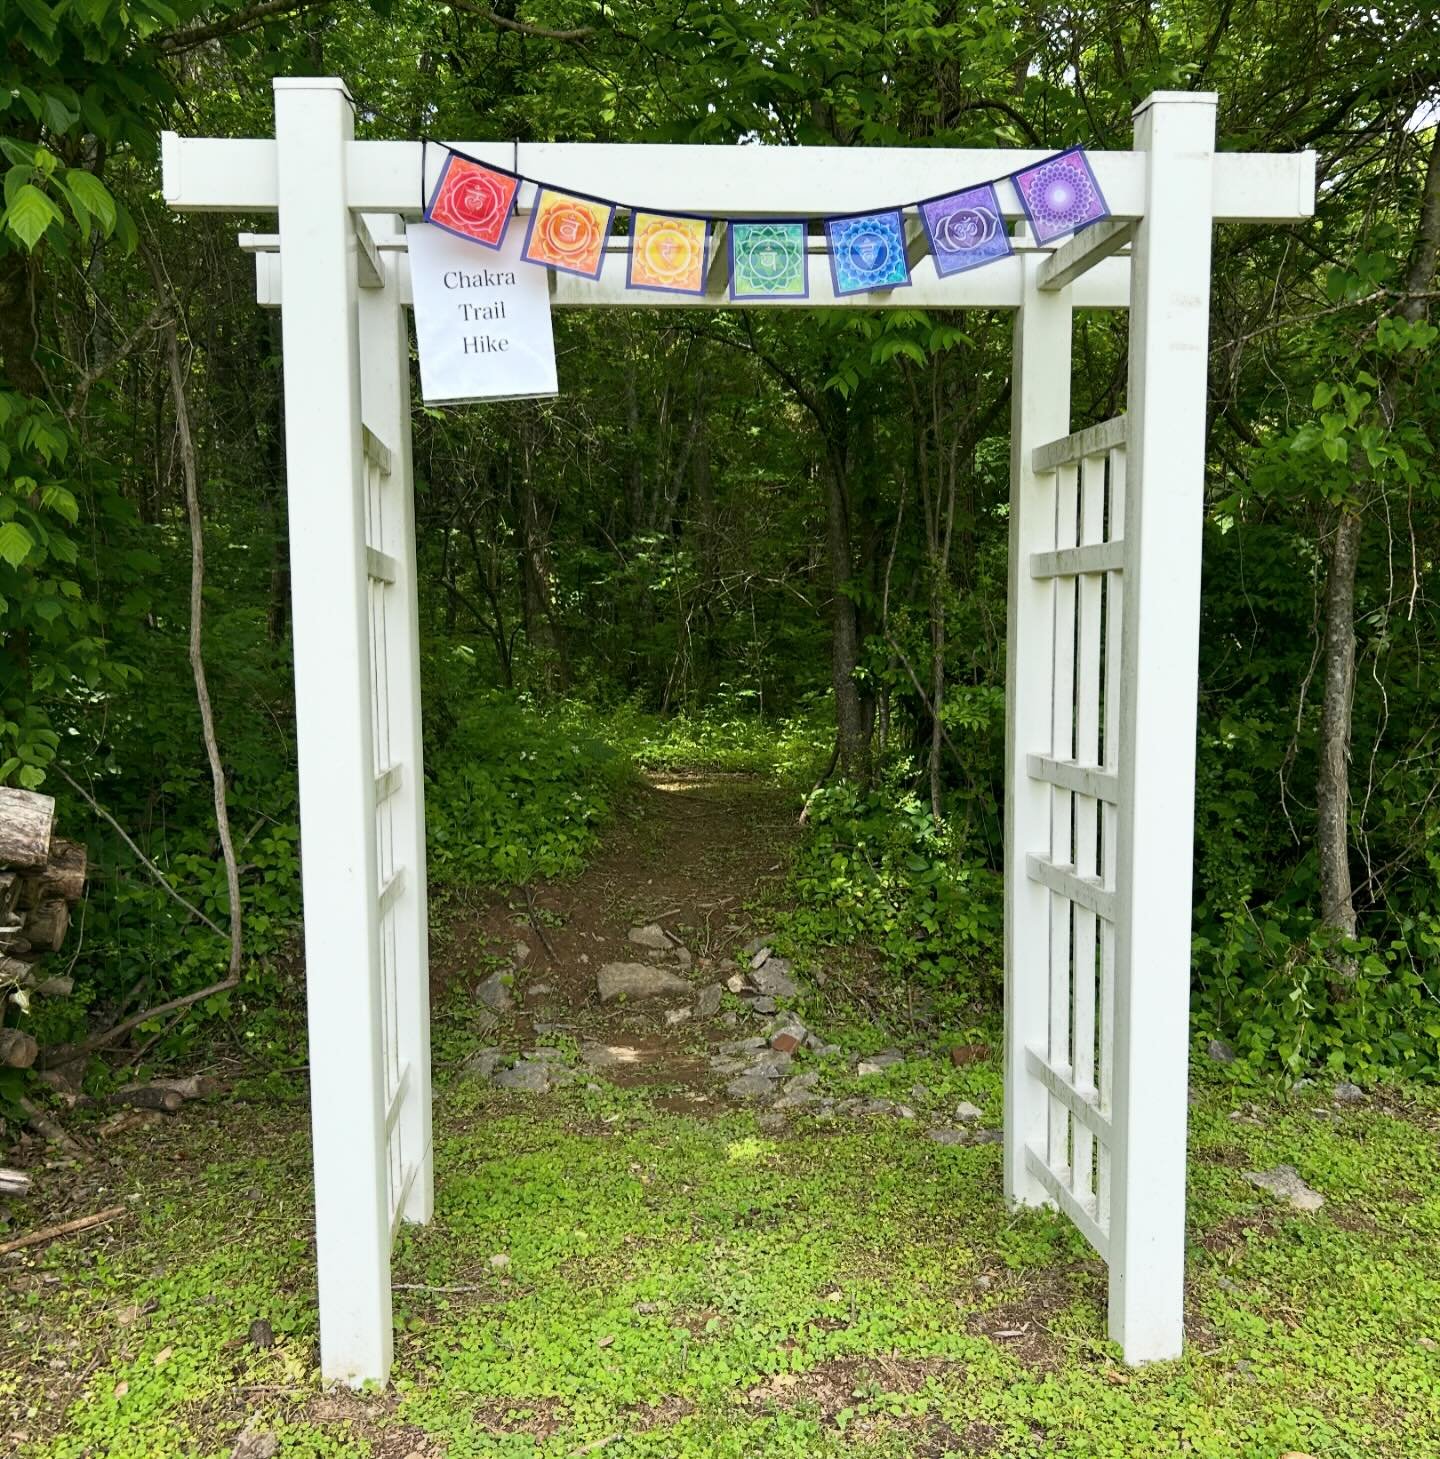 ♾️ Good times at Beltane celebration @kingmurphysretreat yesterday. 

Had my first Hape' experience, an insightful reading, a great reiki session, and met some new soul family members. My oldest and I had a lovely chakra trail walk, and she got adorn